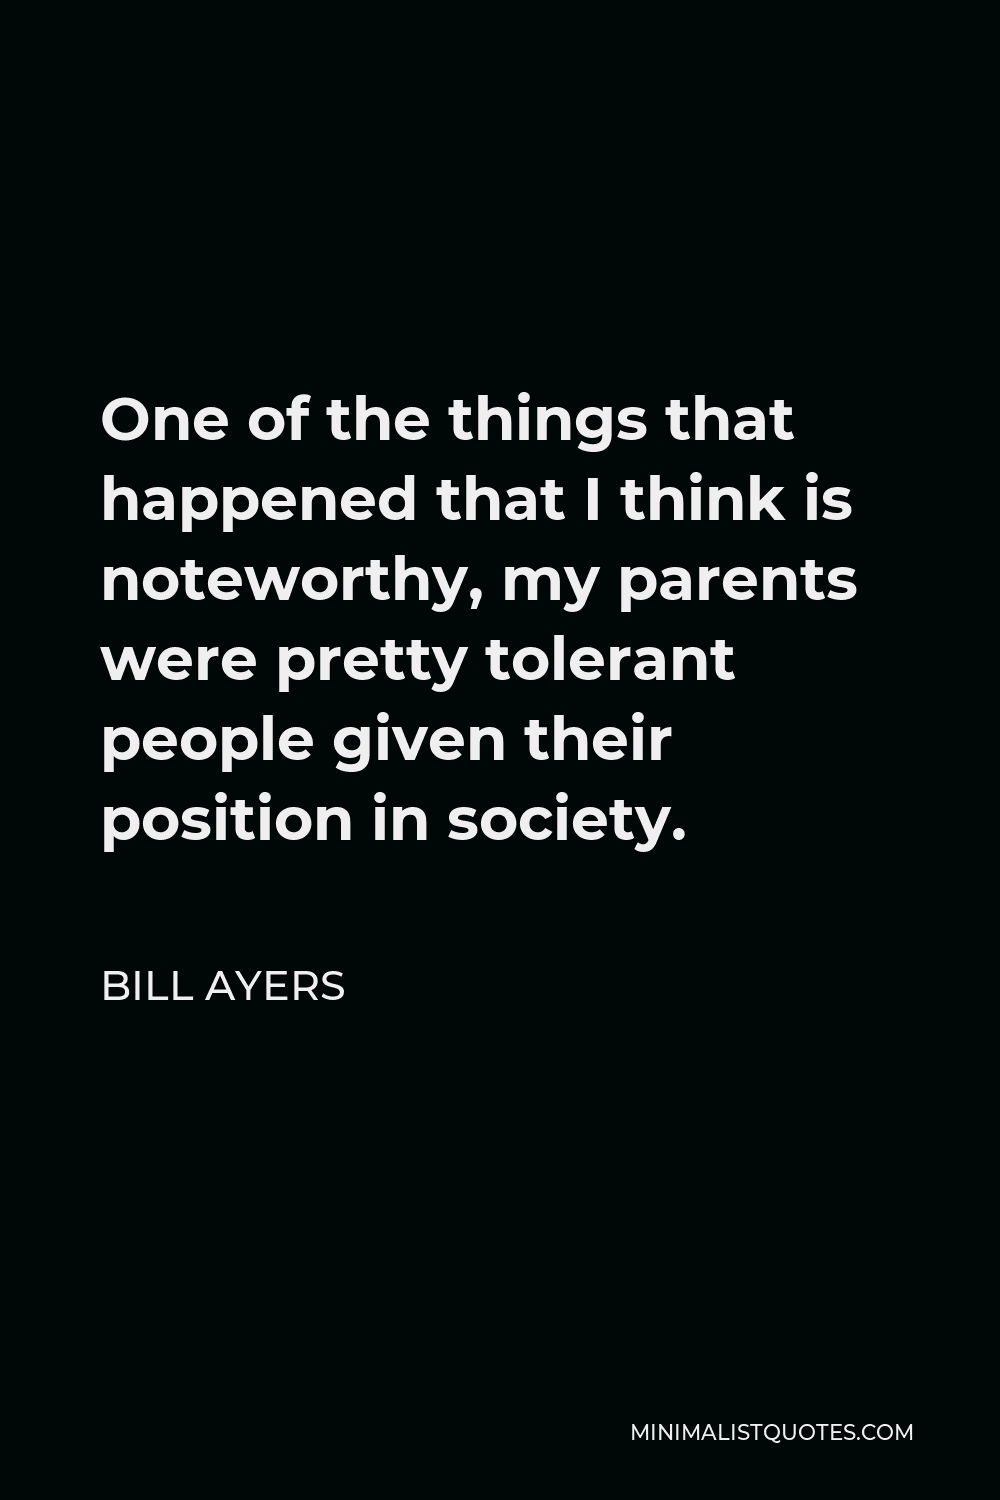 Bill Ayers Quote - One of the things that happened that I think is noteworthy, my parents were pretty tolerant people given their position in society.